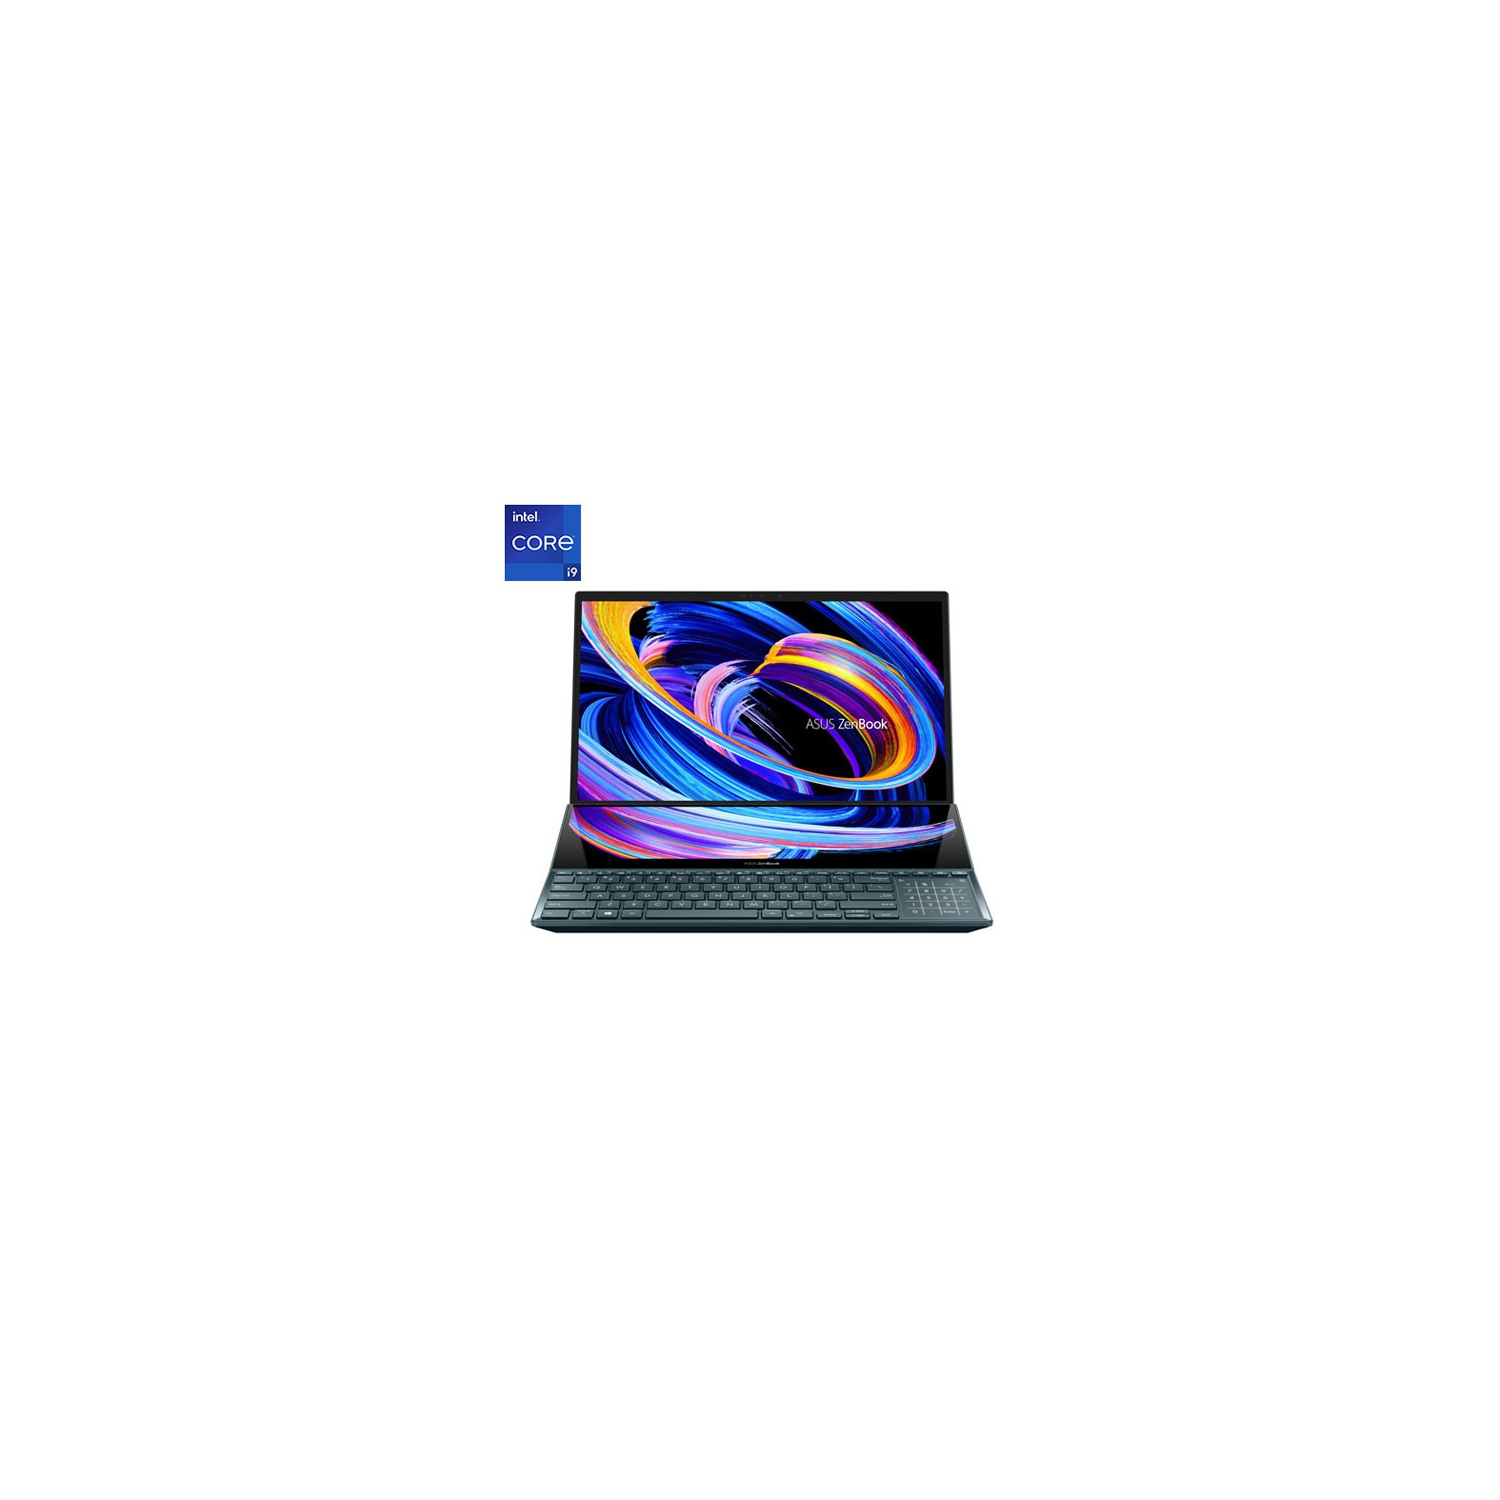 Refurbished (Excellent) - ASUS ZenBook Pro Duo OLED 15.6" Touchscreen Laptop (Intel i9/1TB SSD/32GB RAM/RTX 3080/Win11 Pro) -En